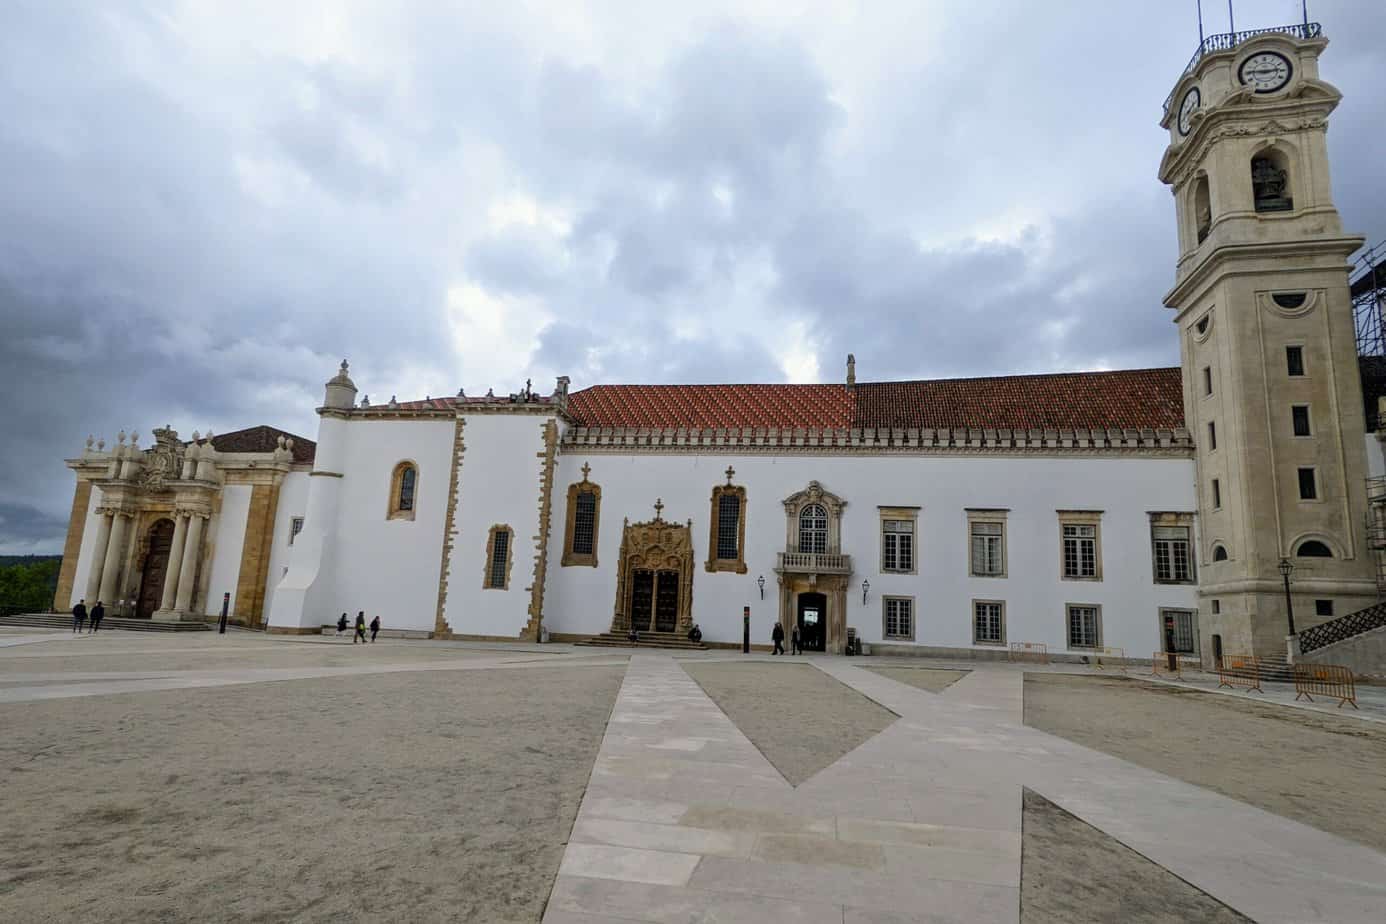 University in Coimbra- White building with brown stone accent and red tile roof